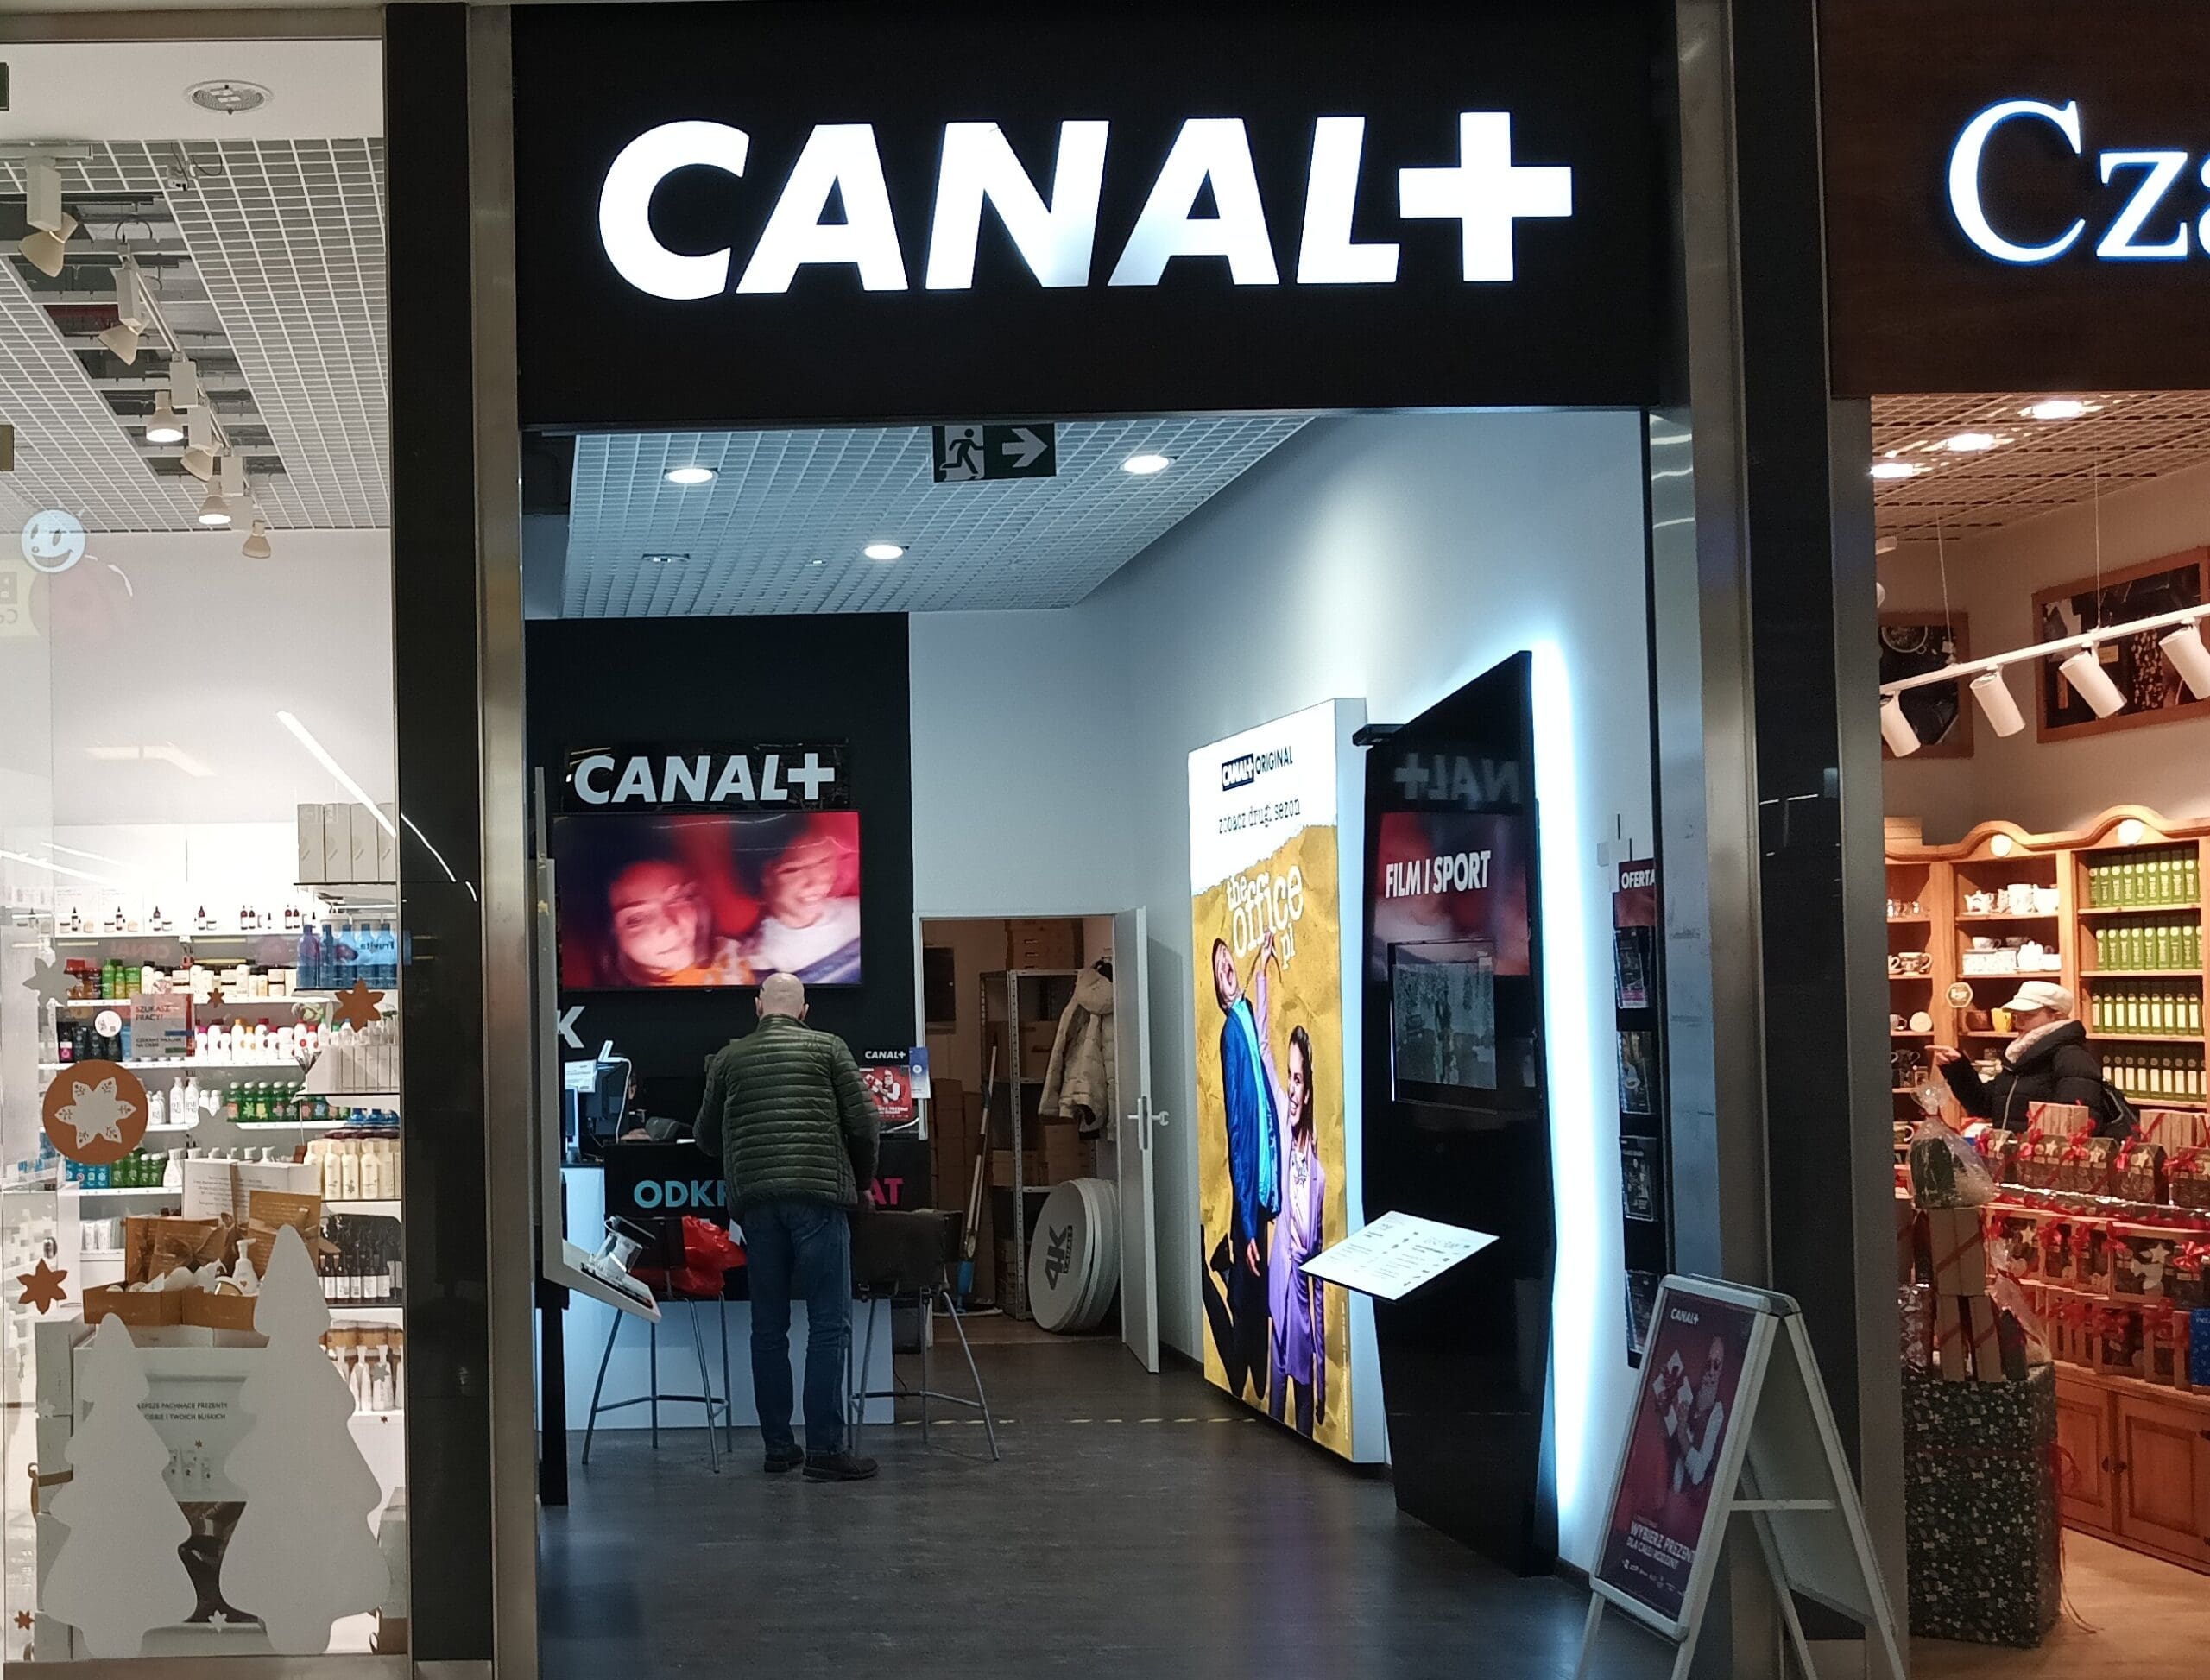 Canal+ Makes Another Move, Acquiring Additional Shares in MultiChoice